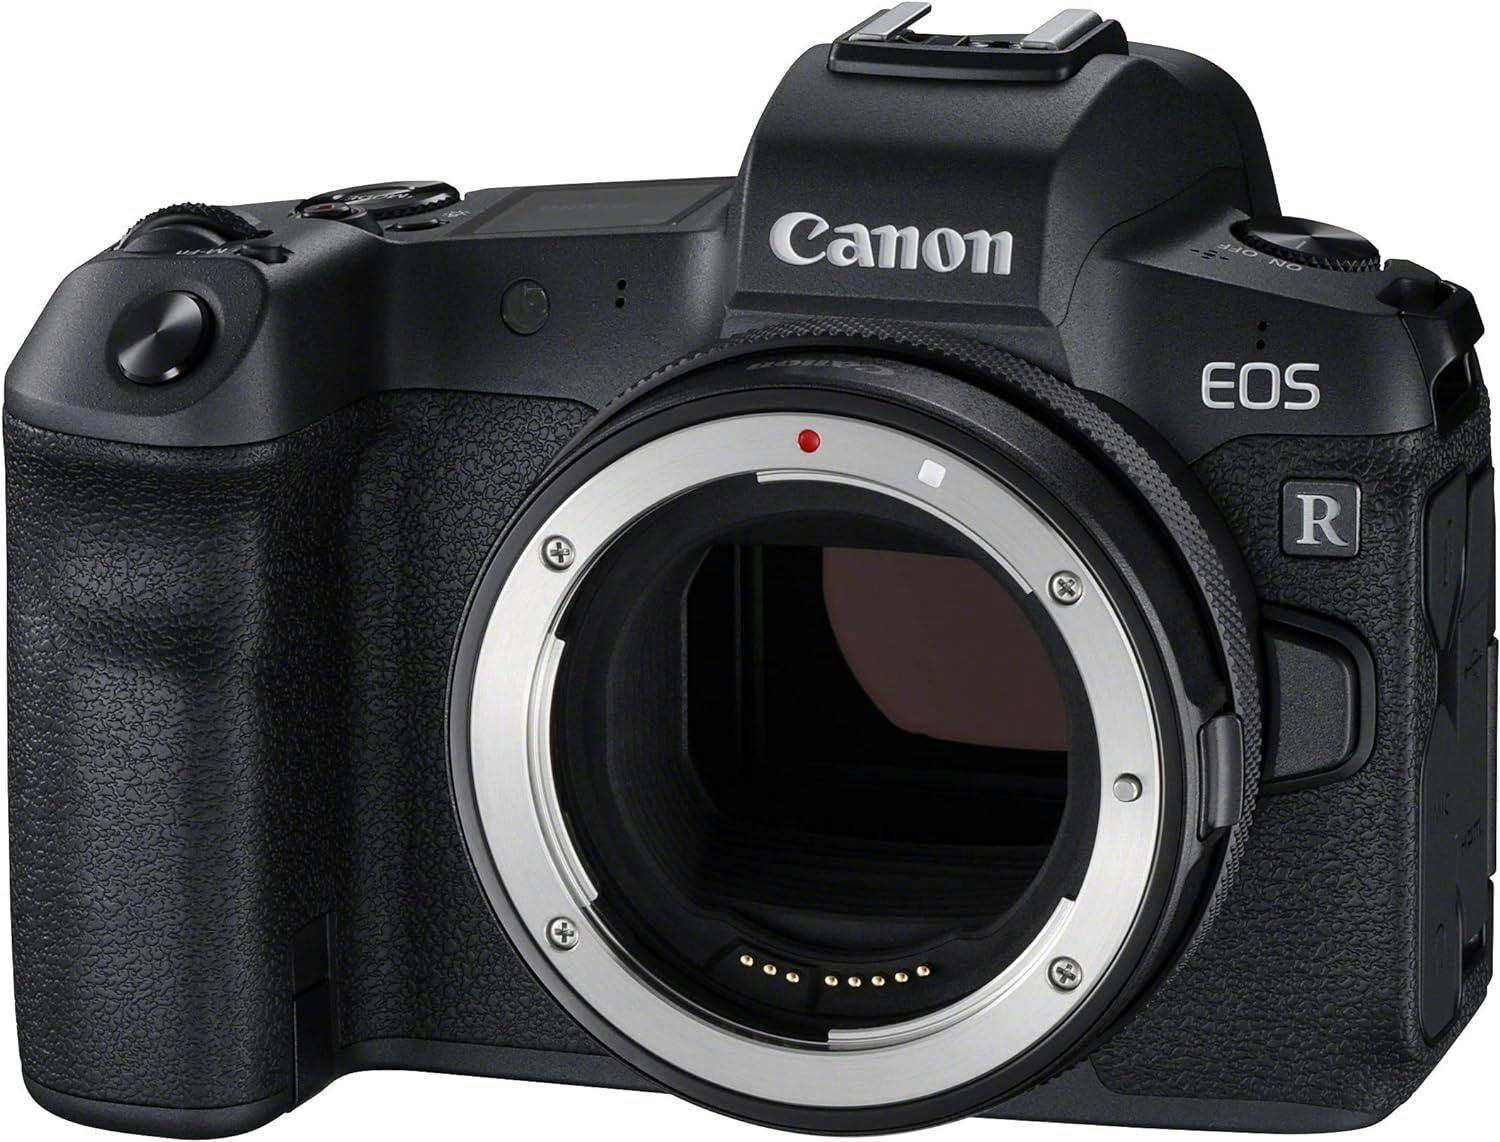 Cover Image for Exploring the Canon EOS R: Canon's First Full-Frame Mirrorless Camera